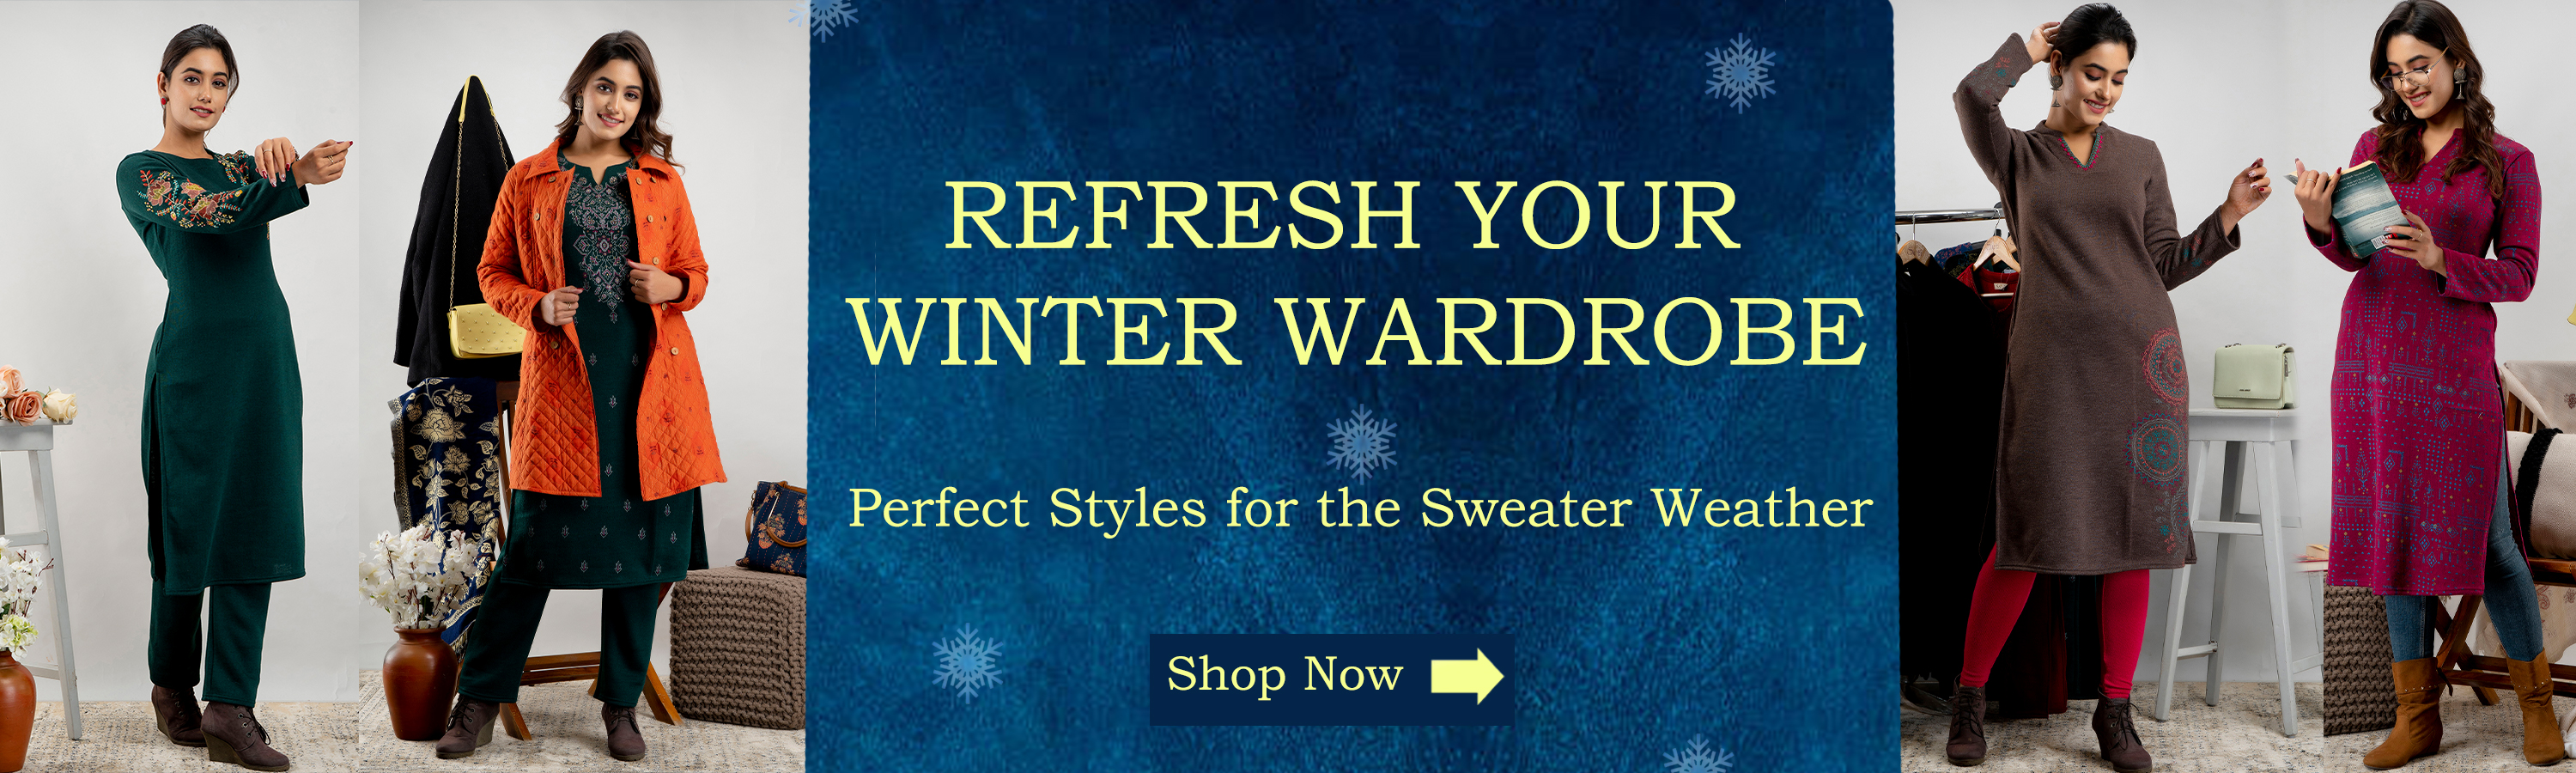 Buy Dark Sky Blue Shirts, Tops & Tunic for Women by VASTRAA FUSION Online